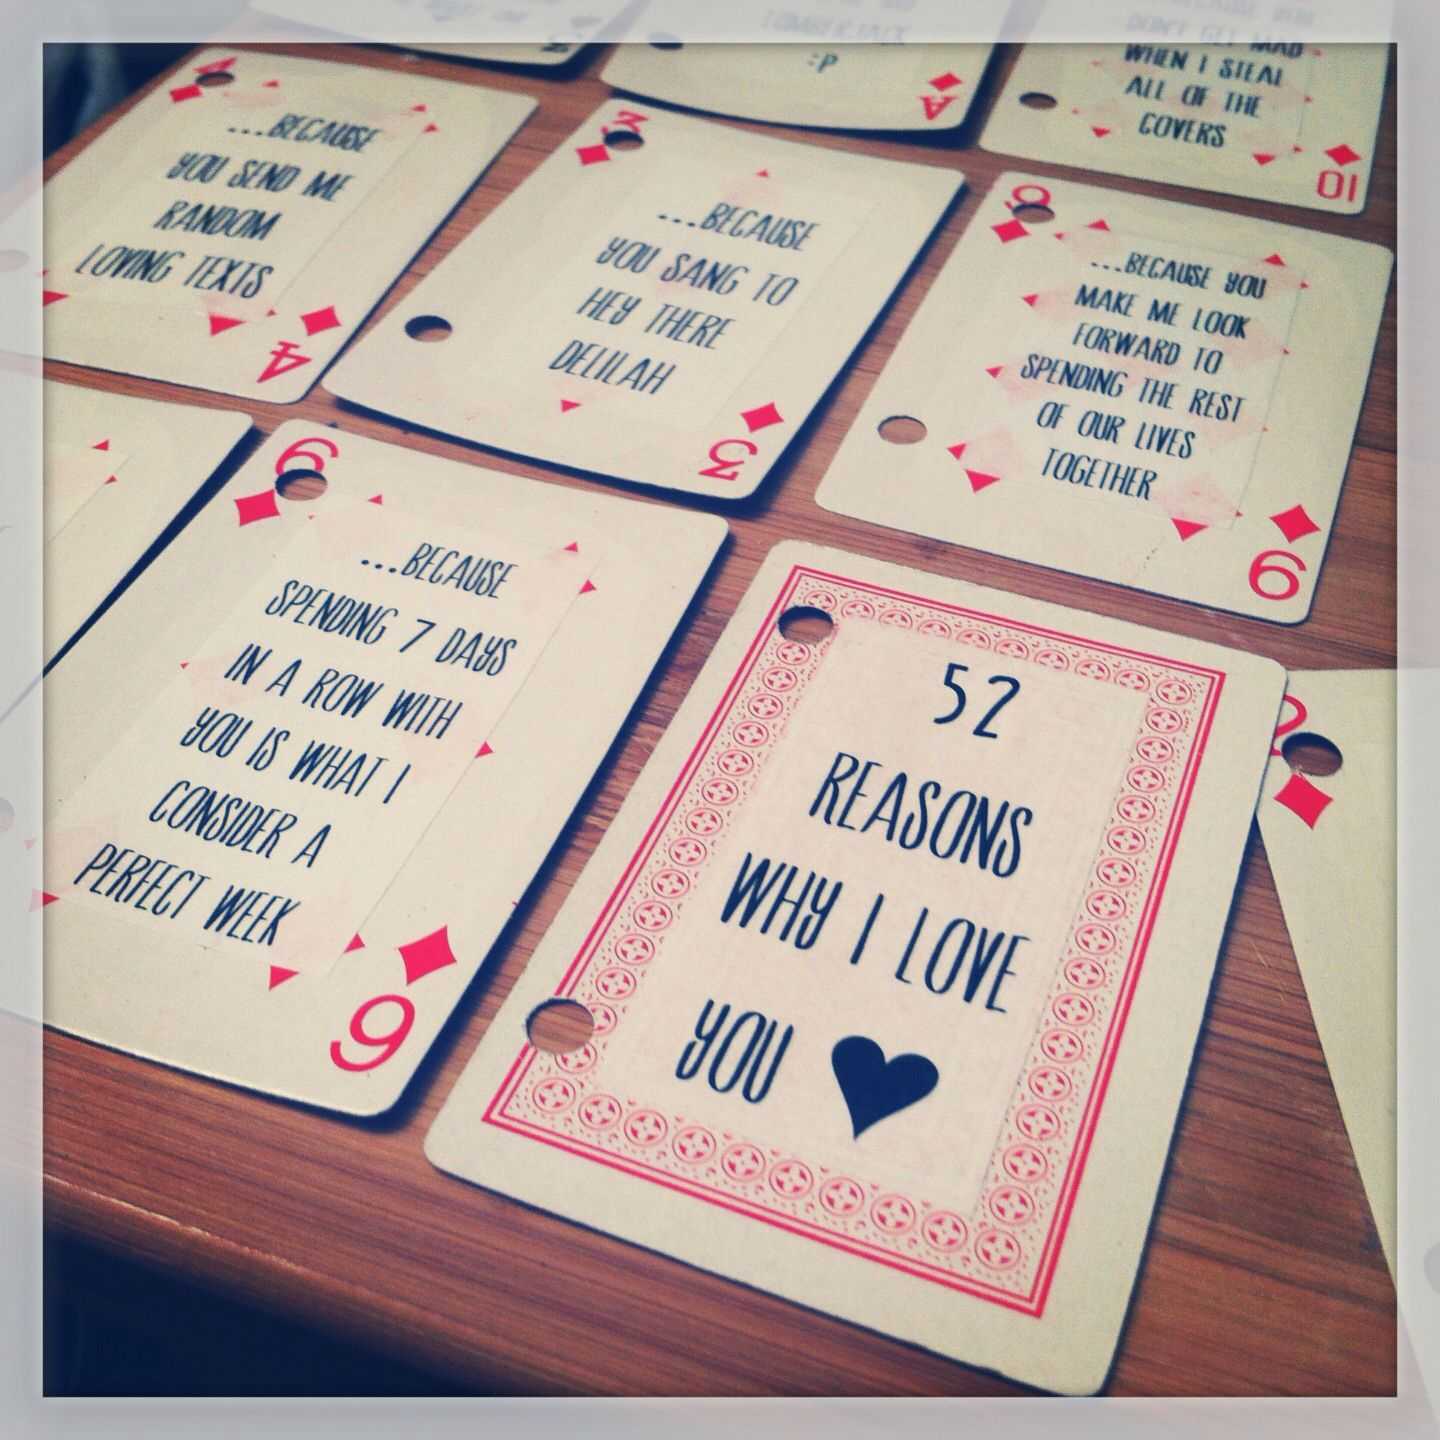 Diy 52 Things I Love About You Deck Cards Gift | Cards For In 52 Things I Love About You Cards Template